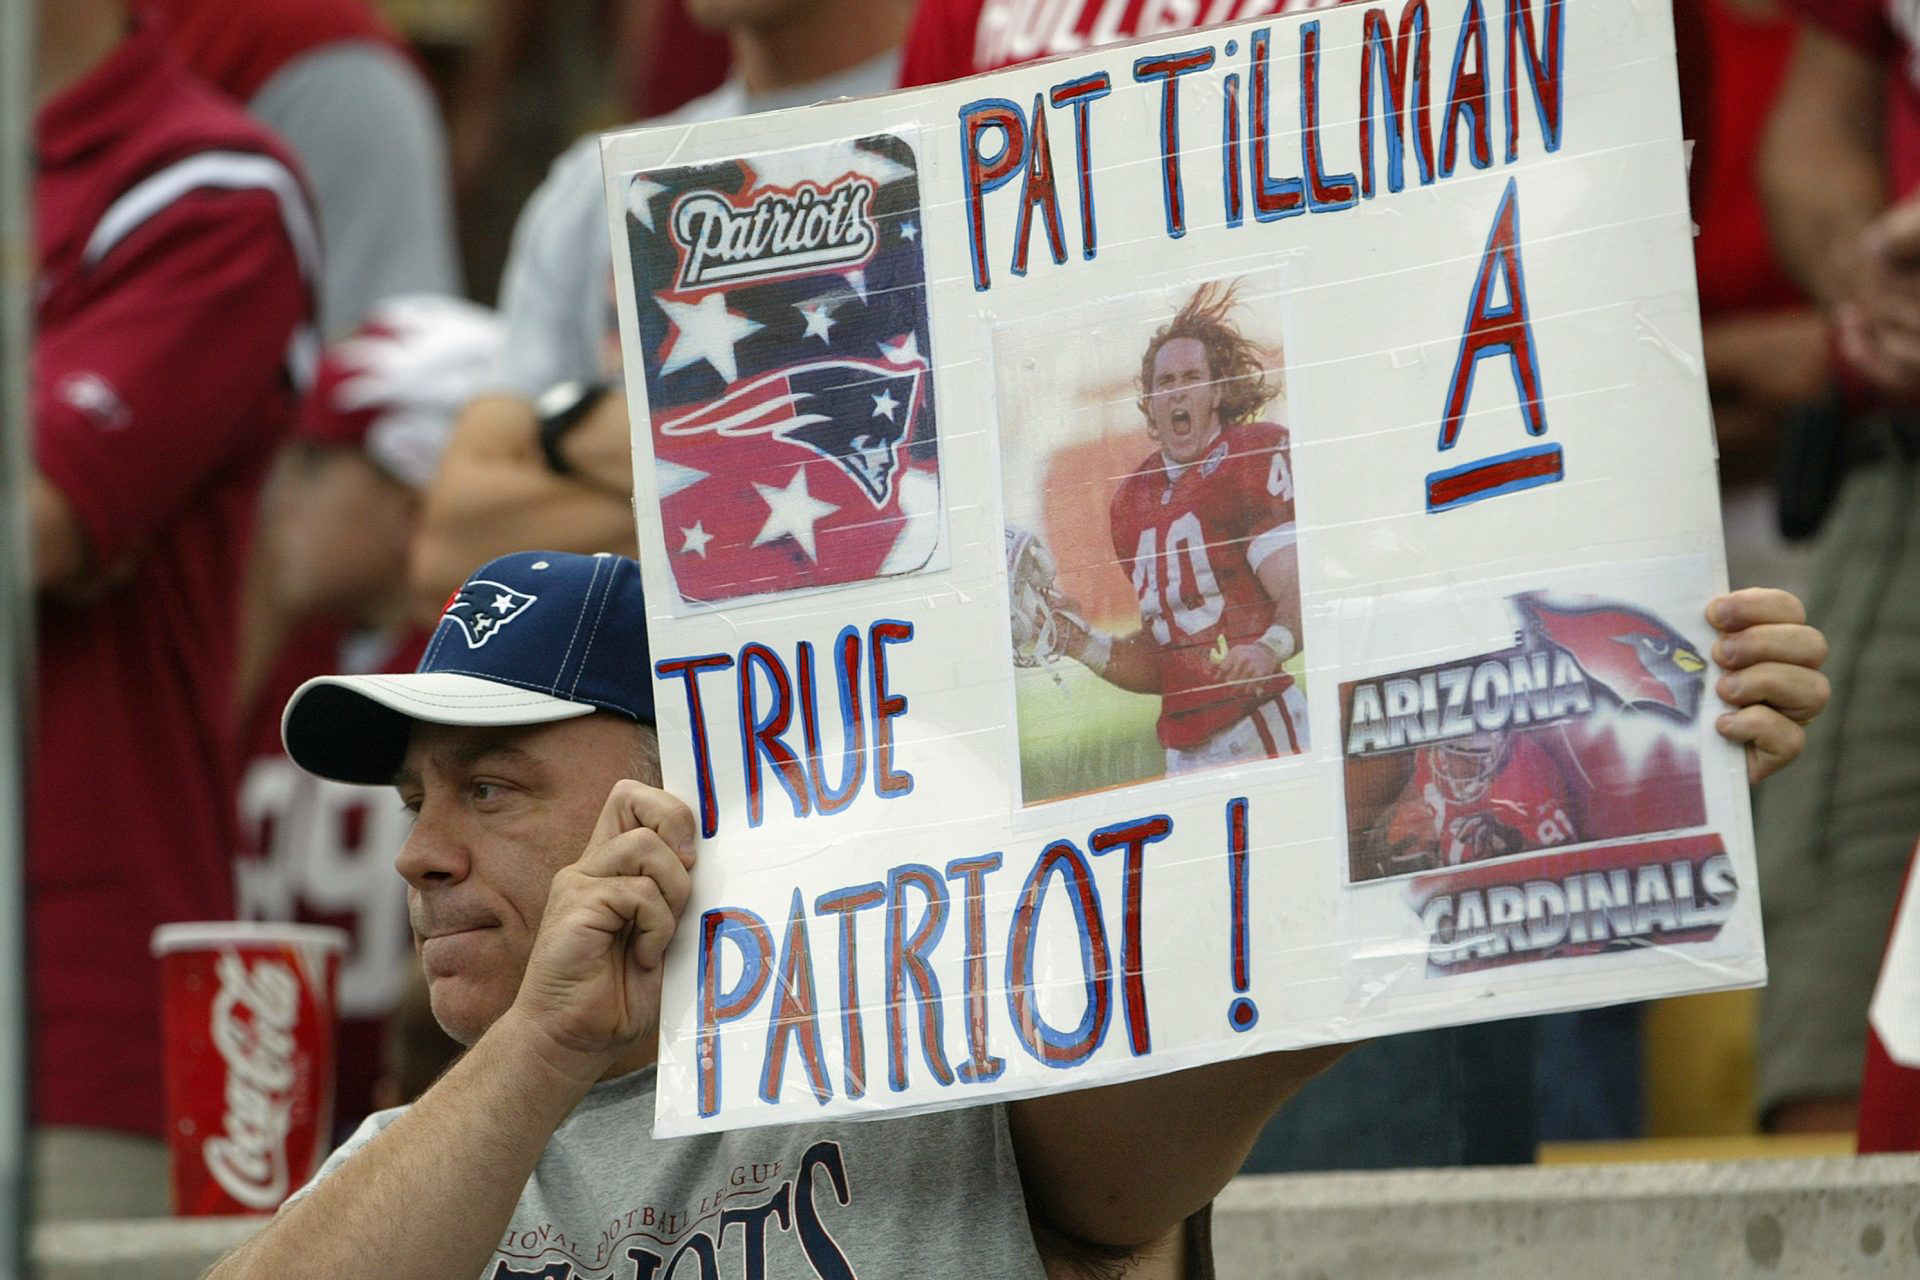 Pat Tillman: The controversial and mysterious death of a reluctant